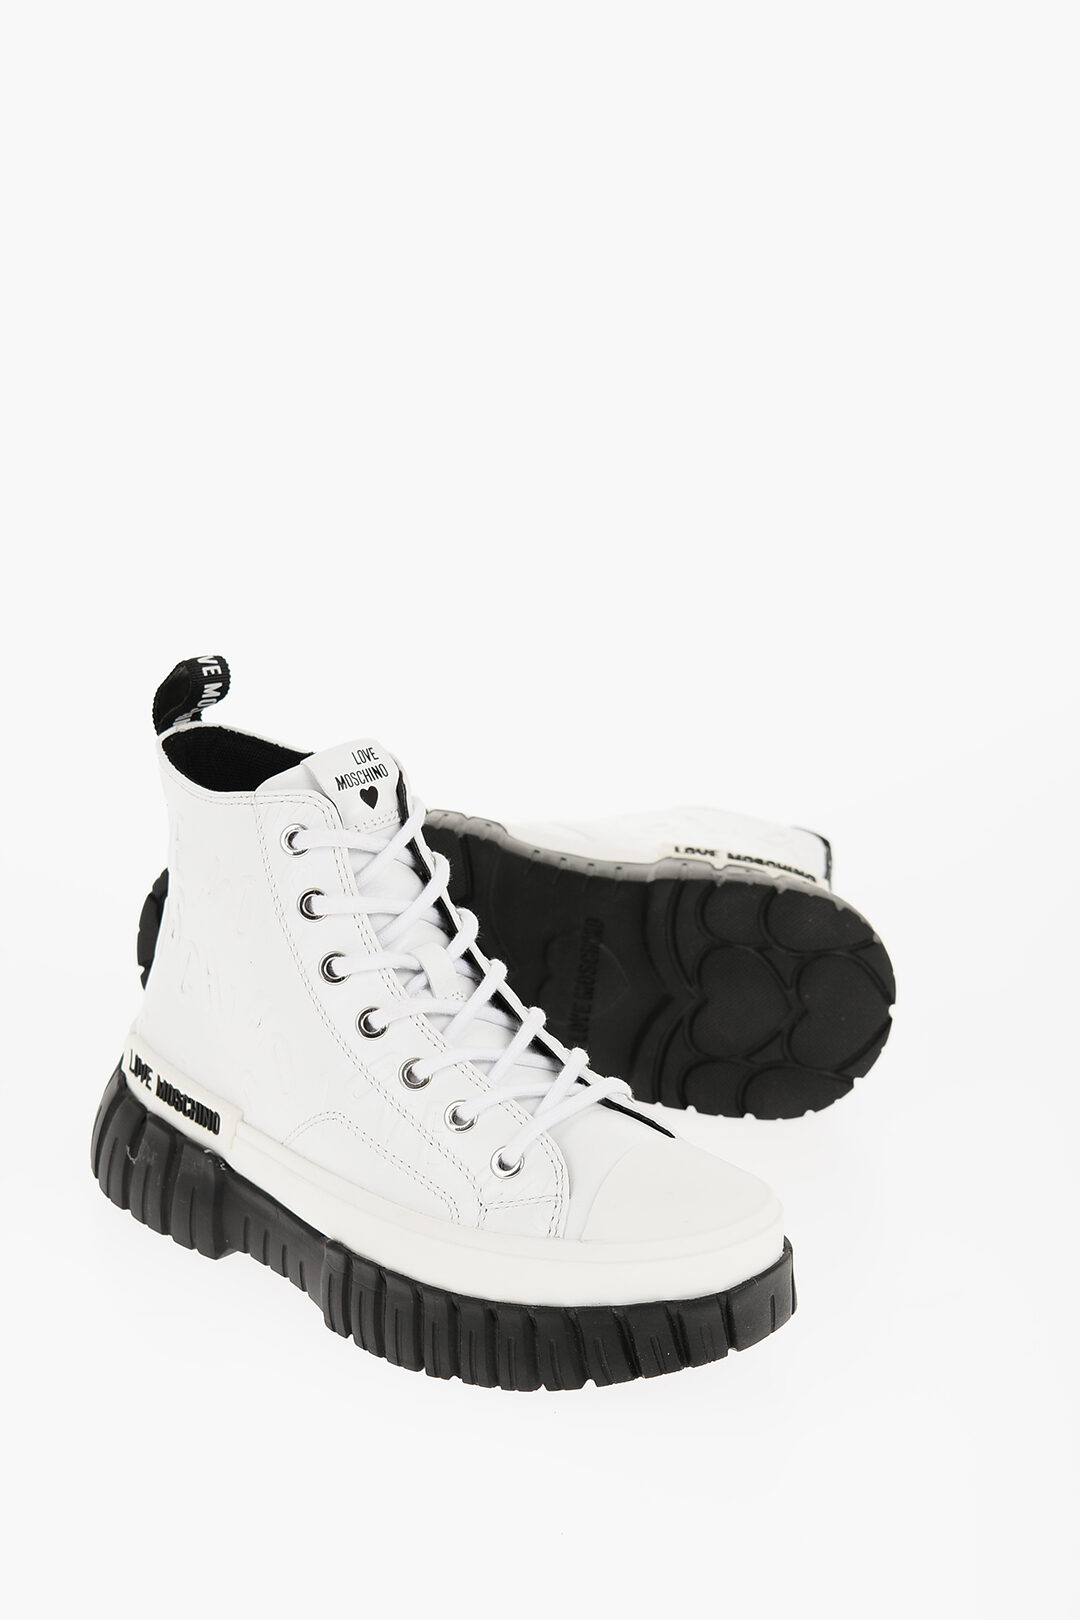 Love Moschino women's sneaker in black and white leather